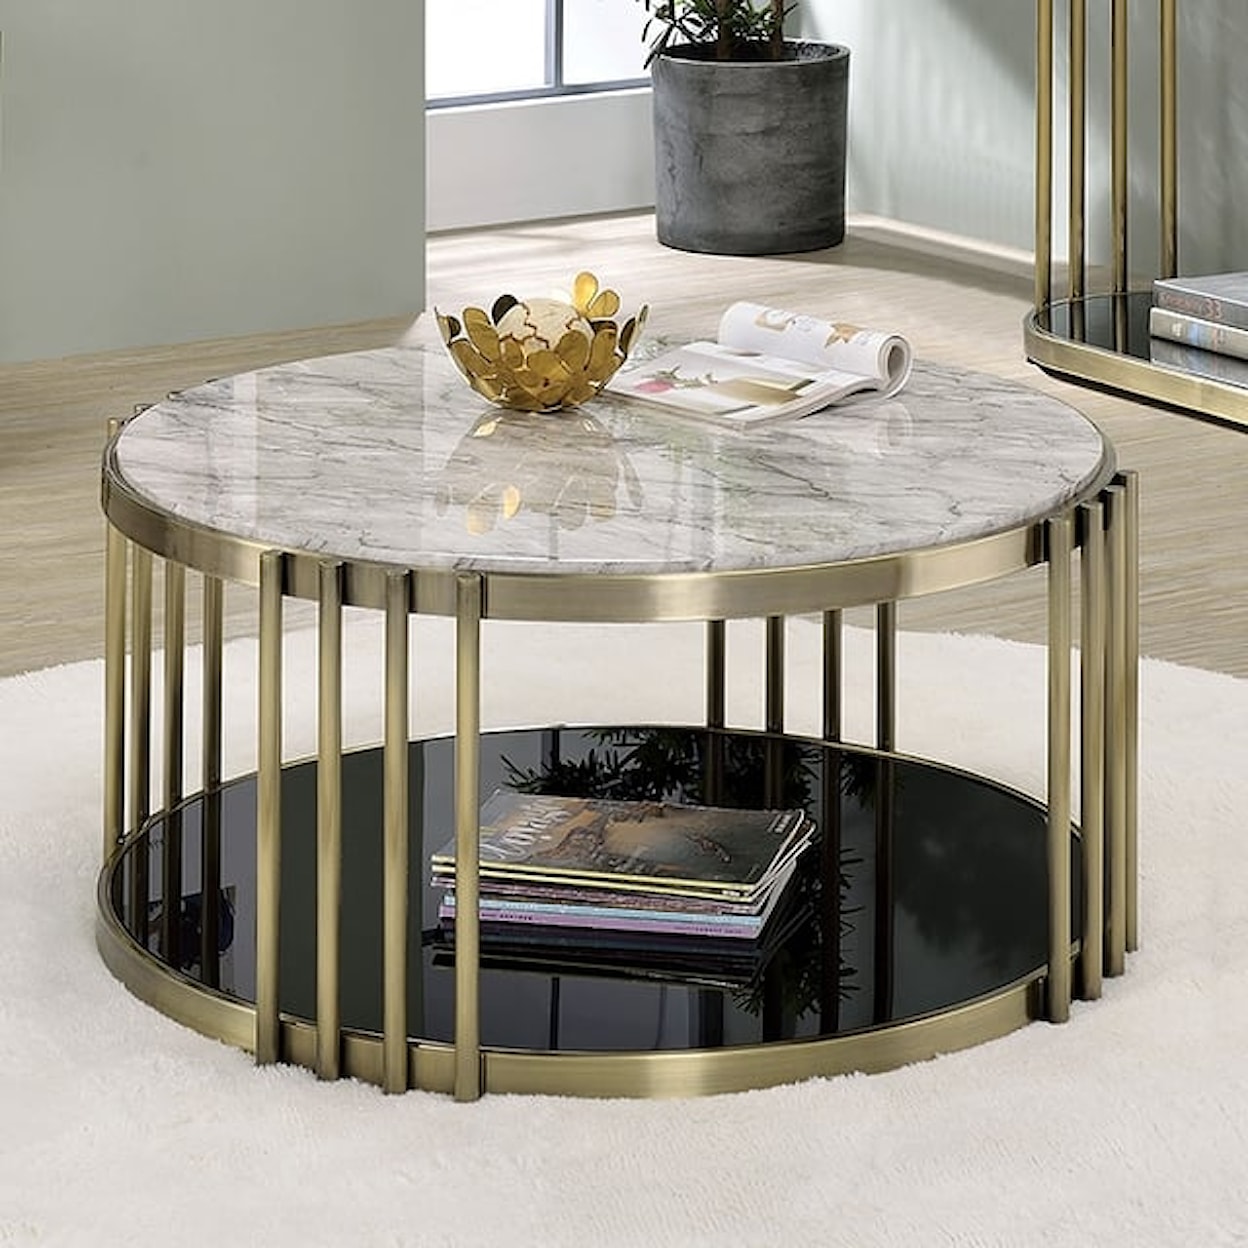 Furniture of America Ofelia Coffee Table with Faux Marble Top